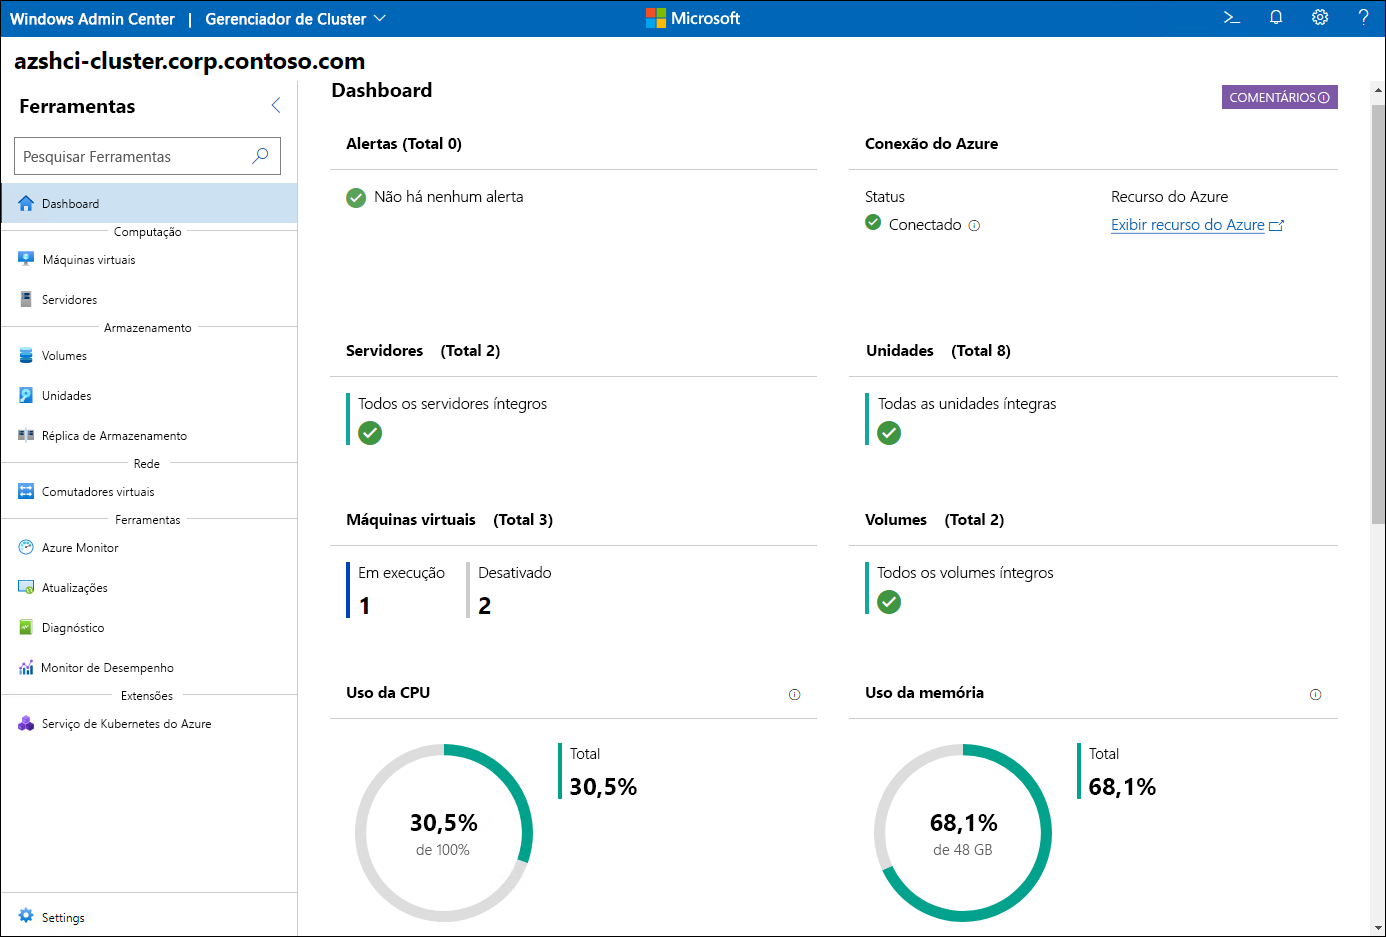 The screenshot depicts the Windows Admin Center dashboard displaying information about the status and performance of a cluster.